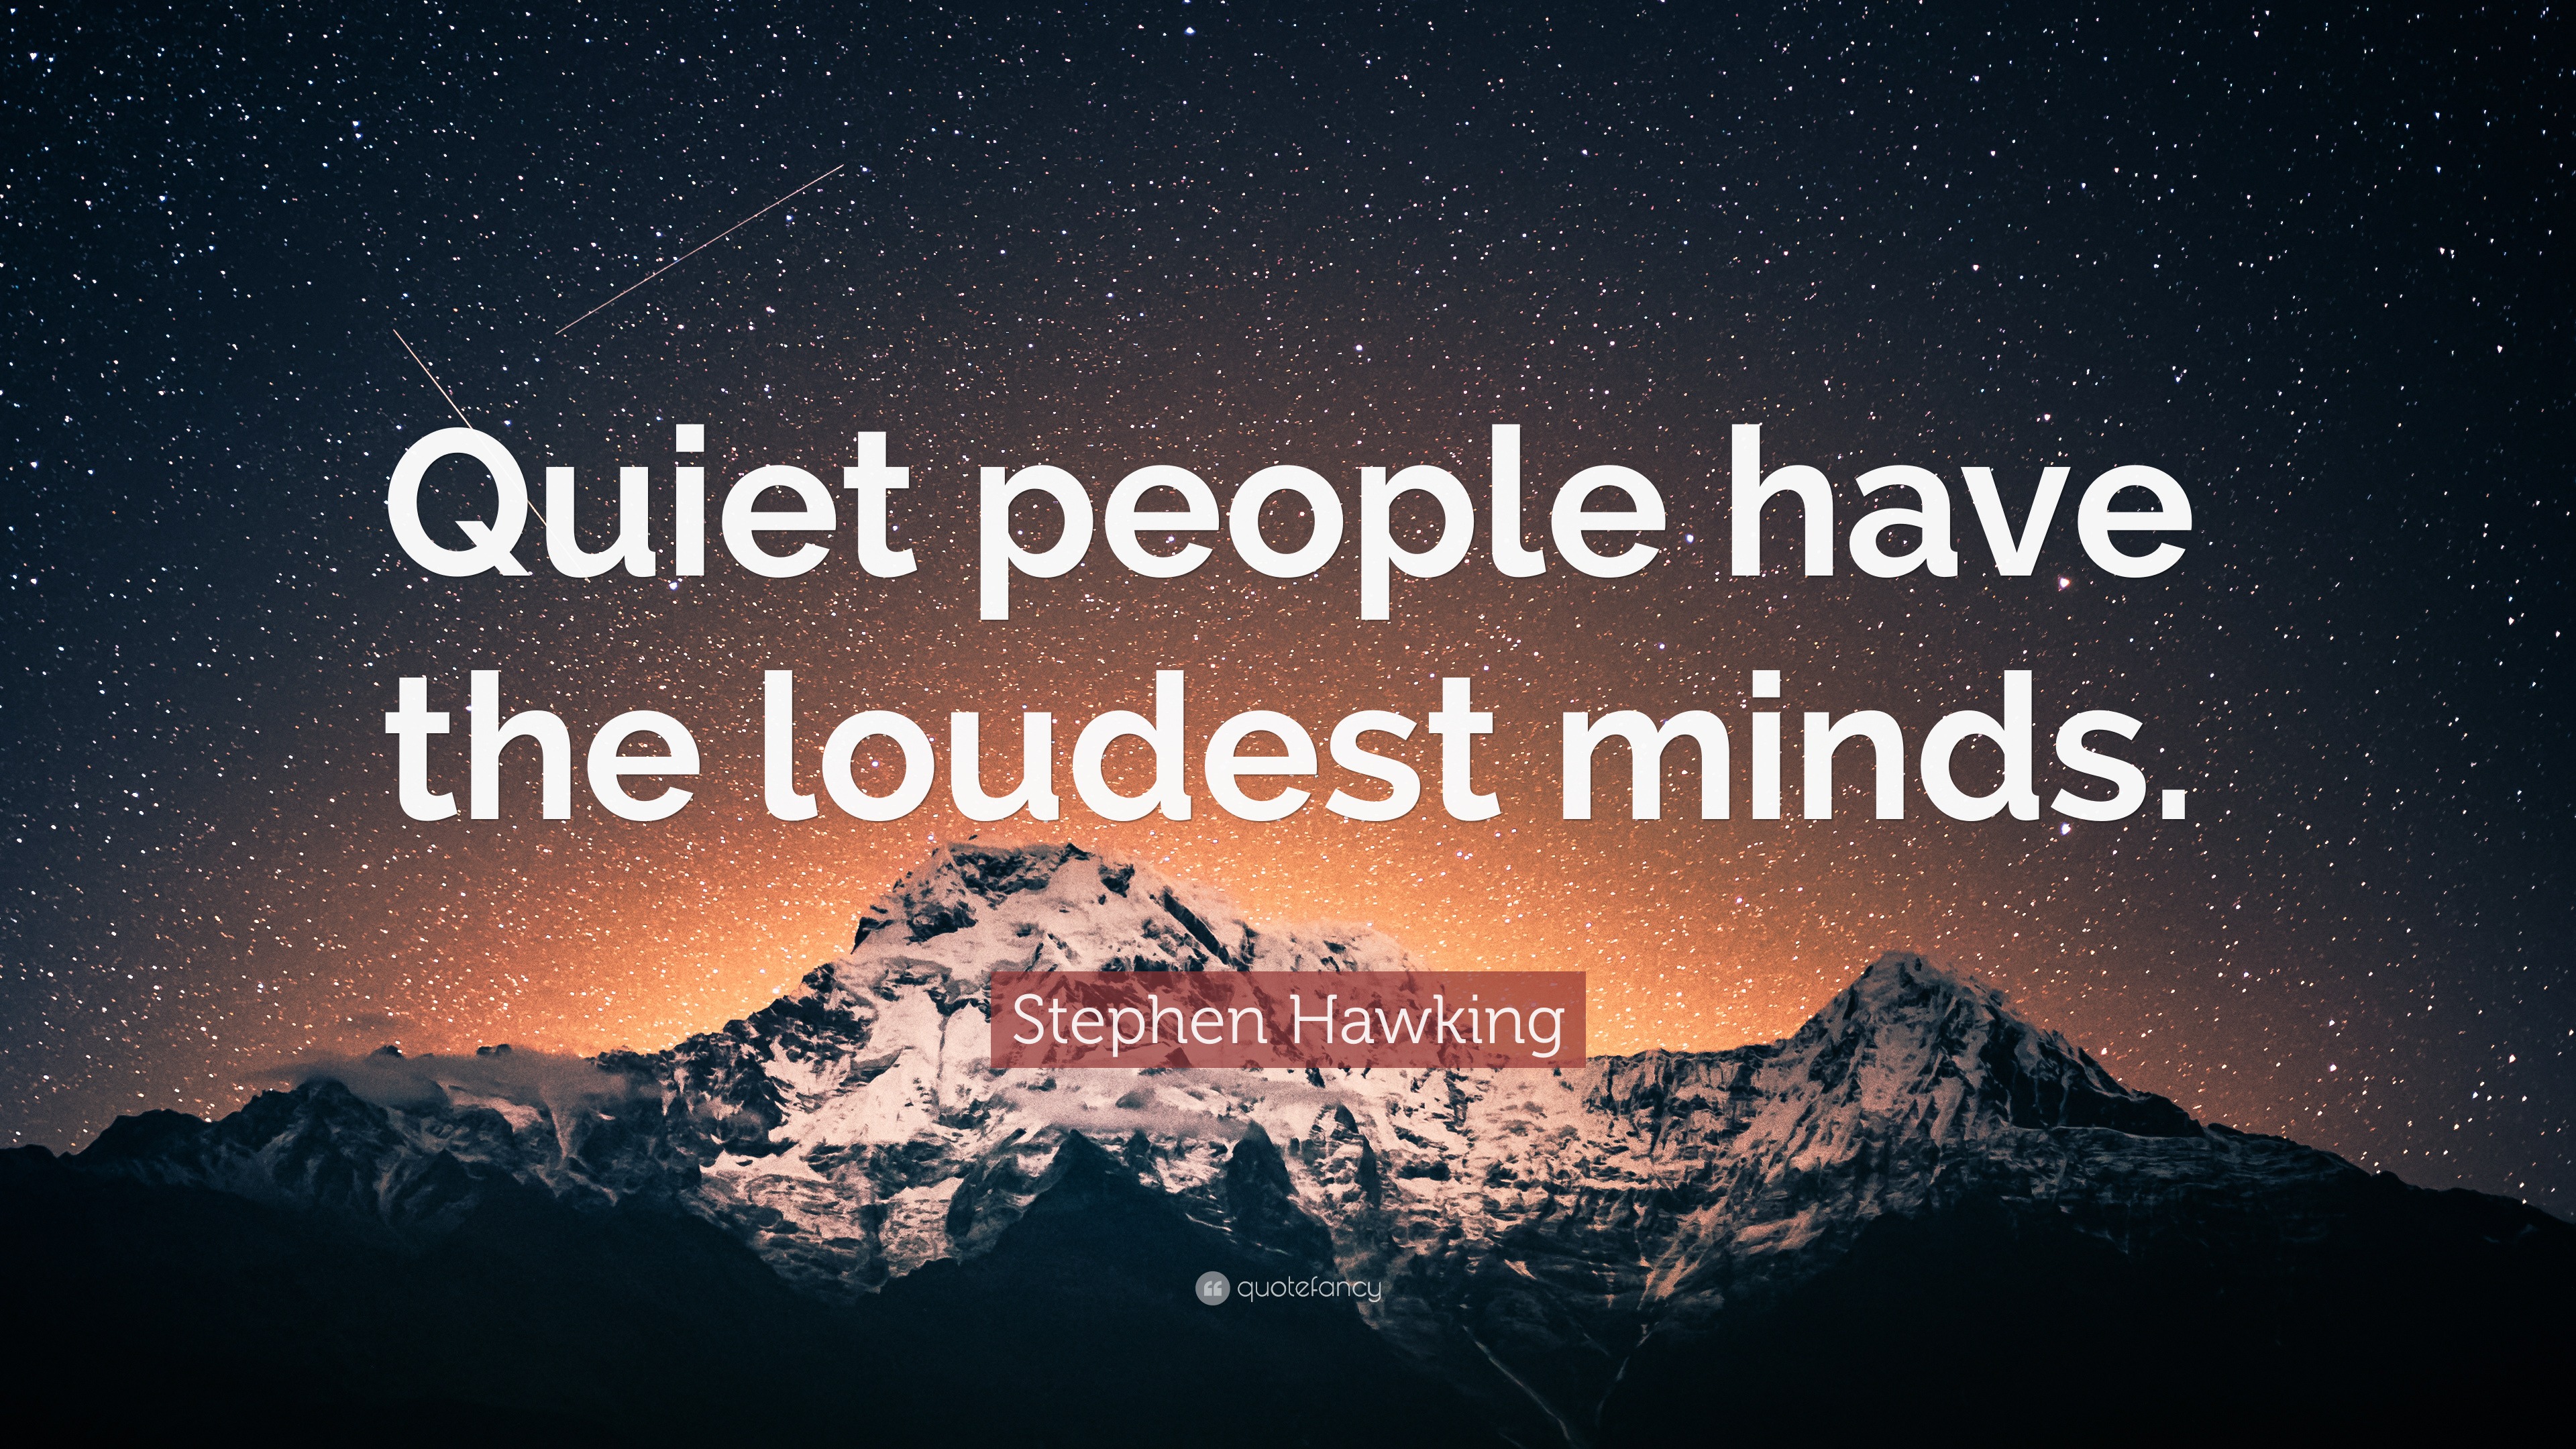 Stephen Hawking Quote: “Quiet people have the loudest minds.” (23